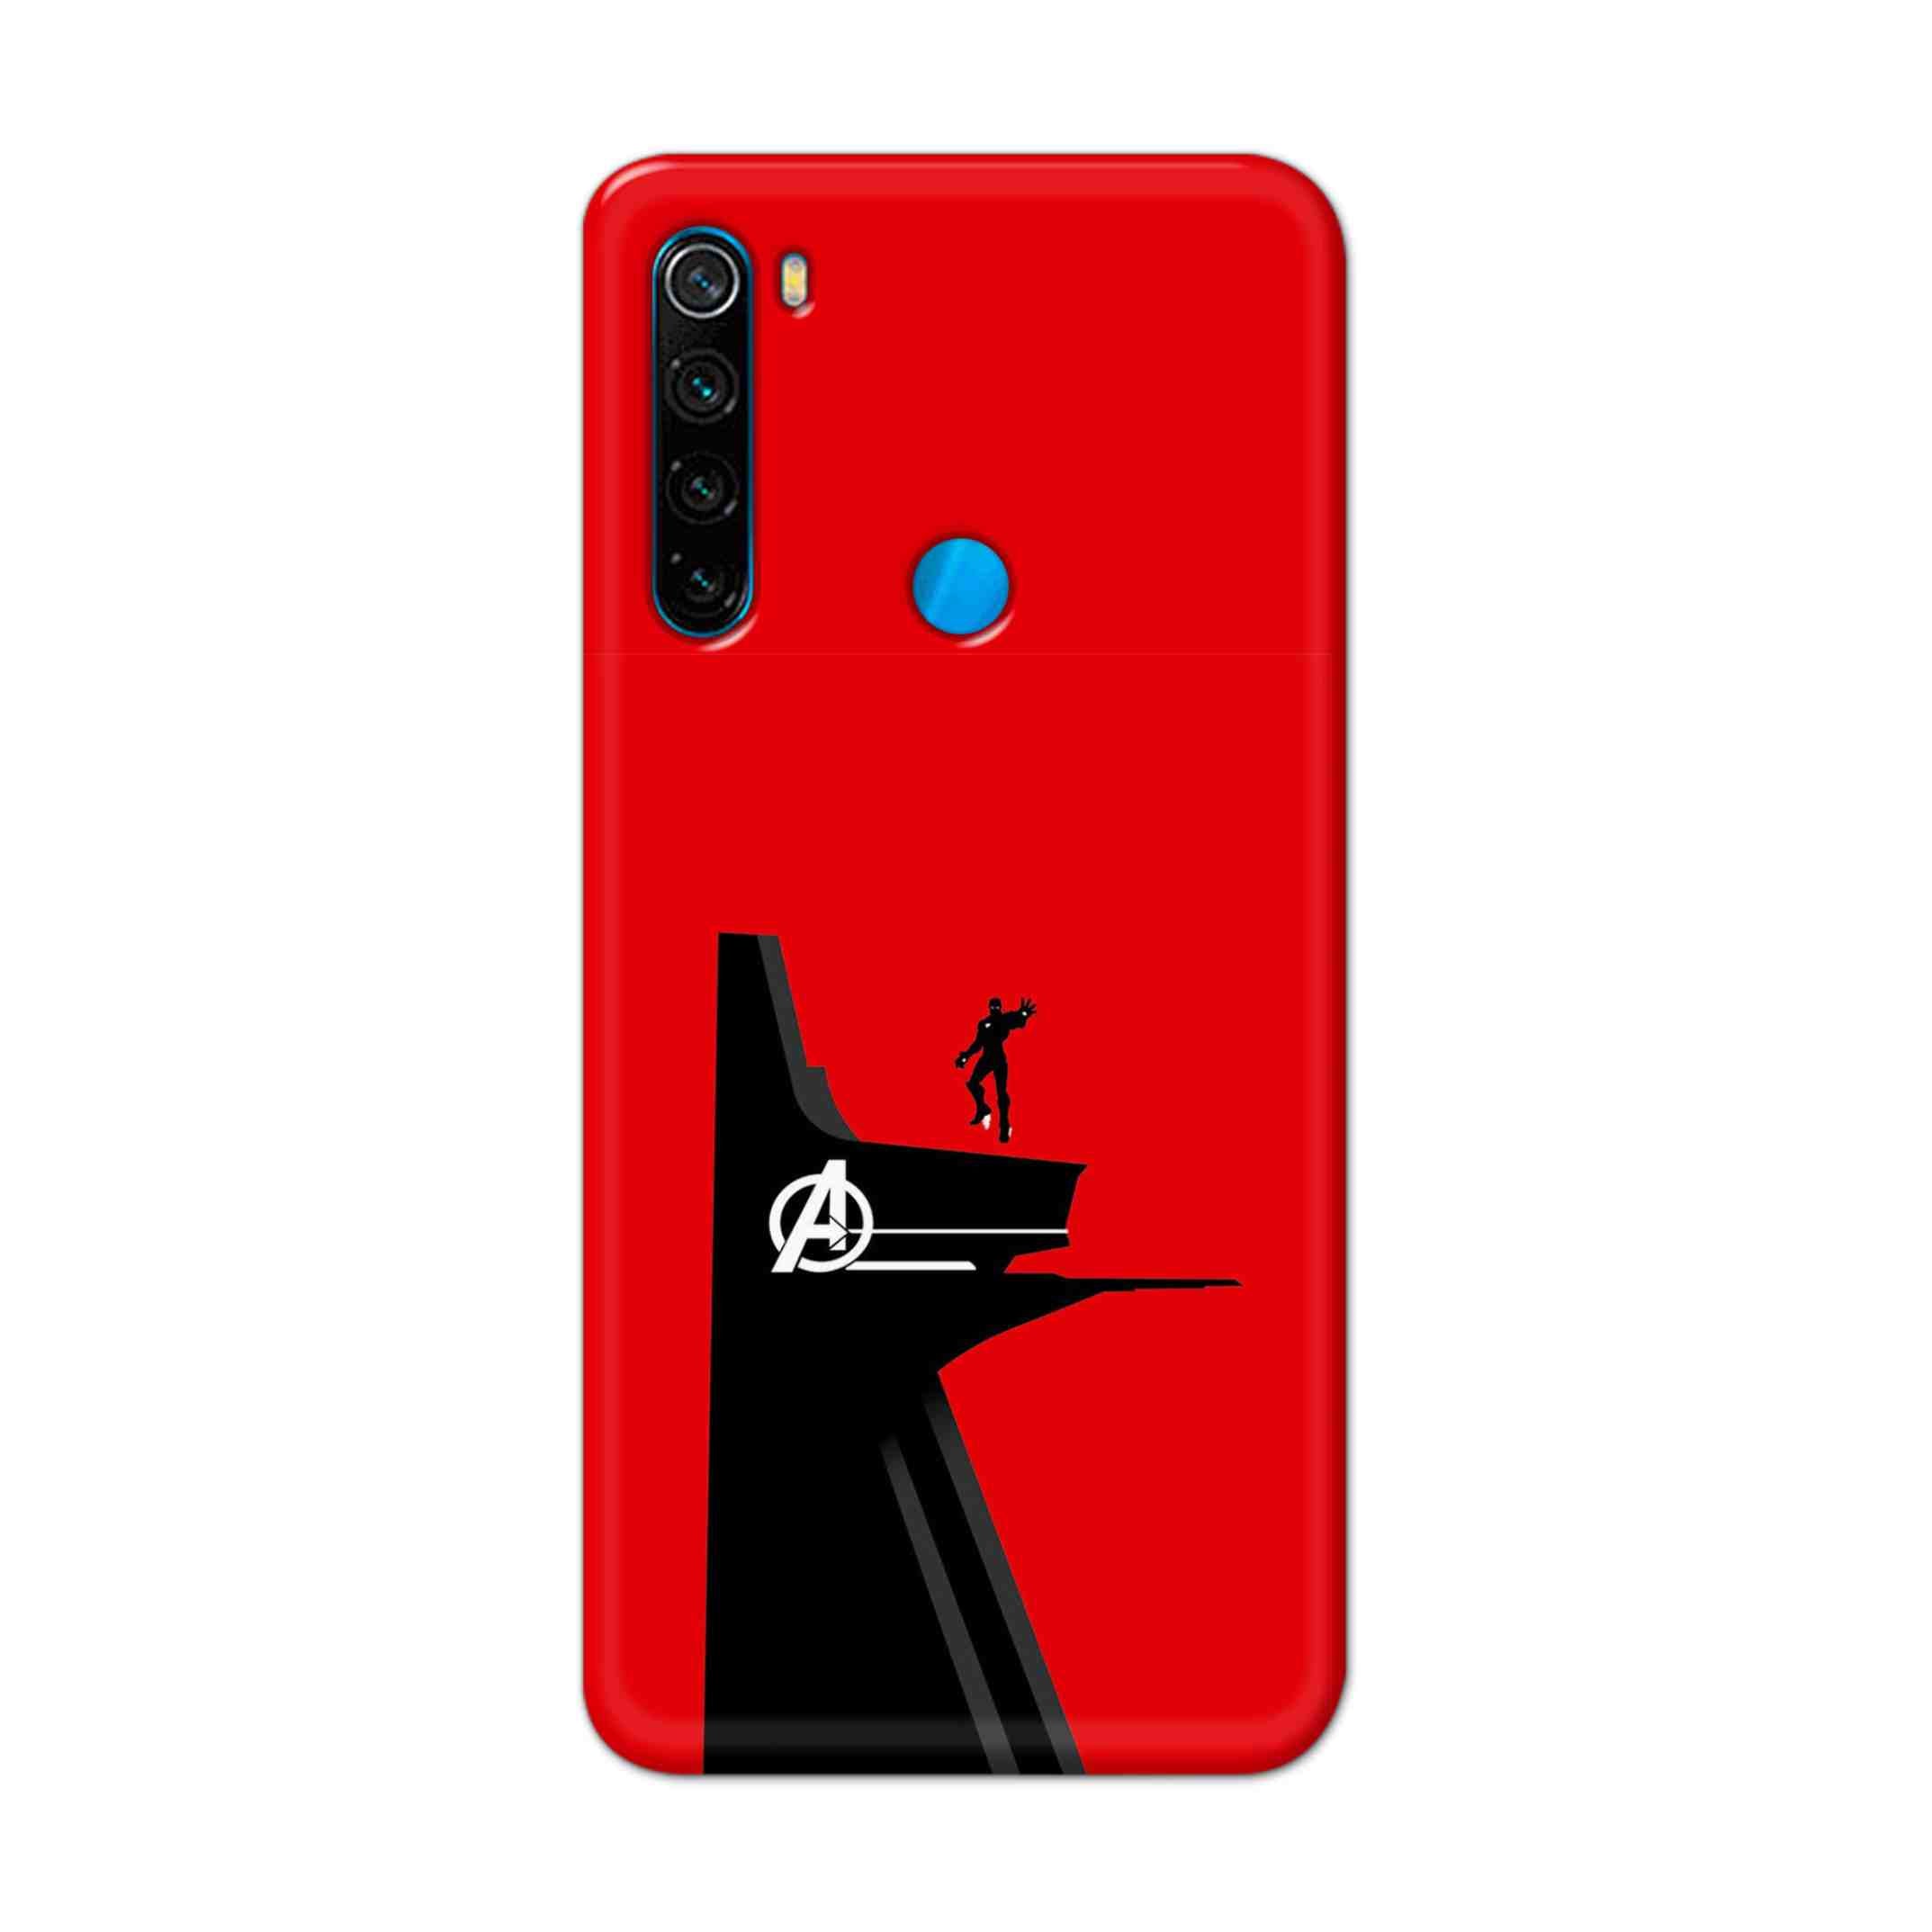 Buy Iron Man Hard Back Mobile Phone Case Cover For Xiaomi Redmi Note 8 Online